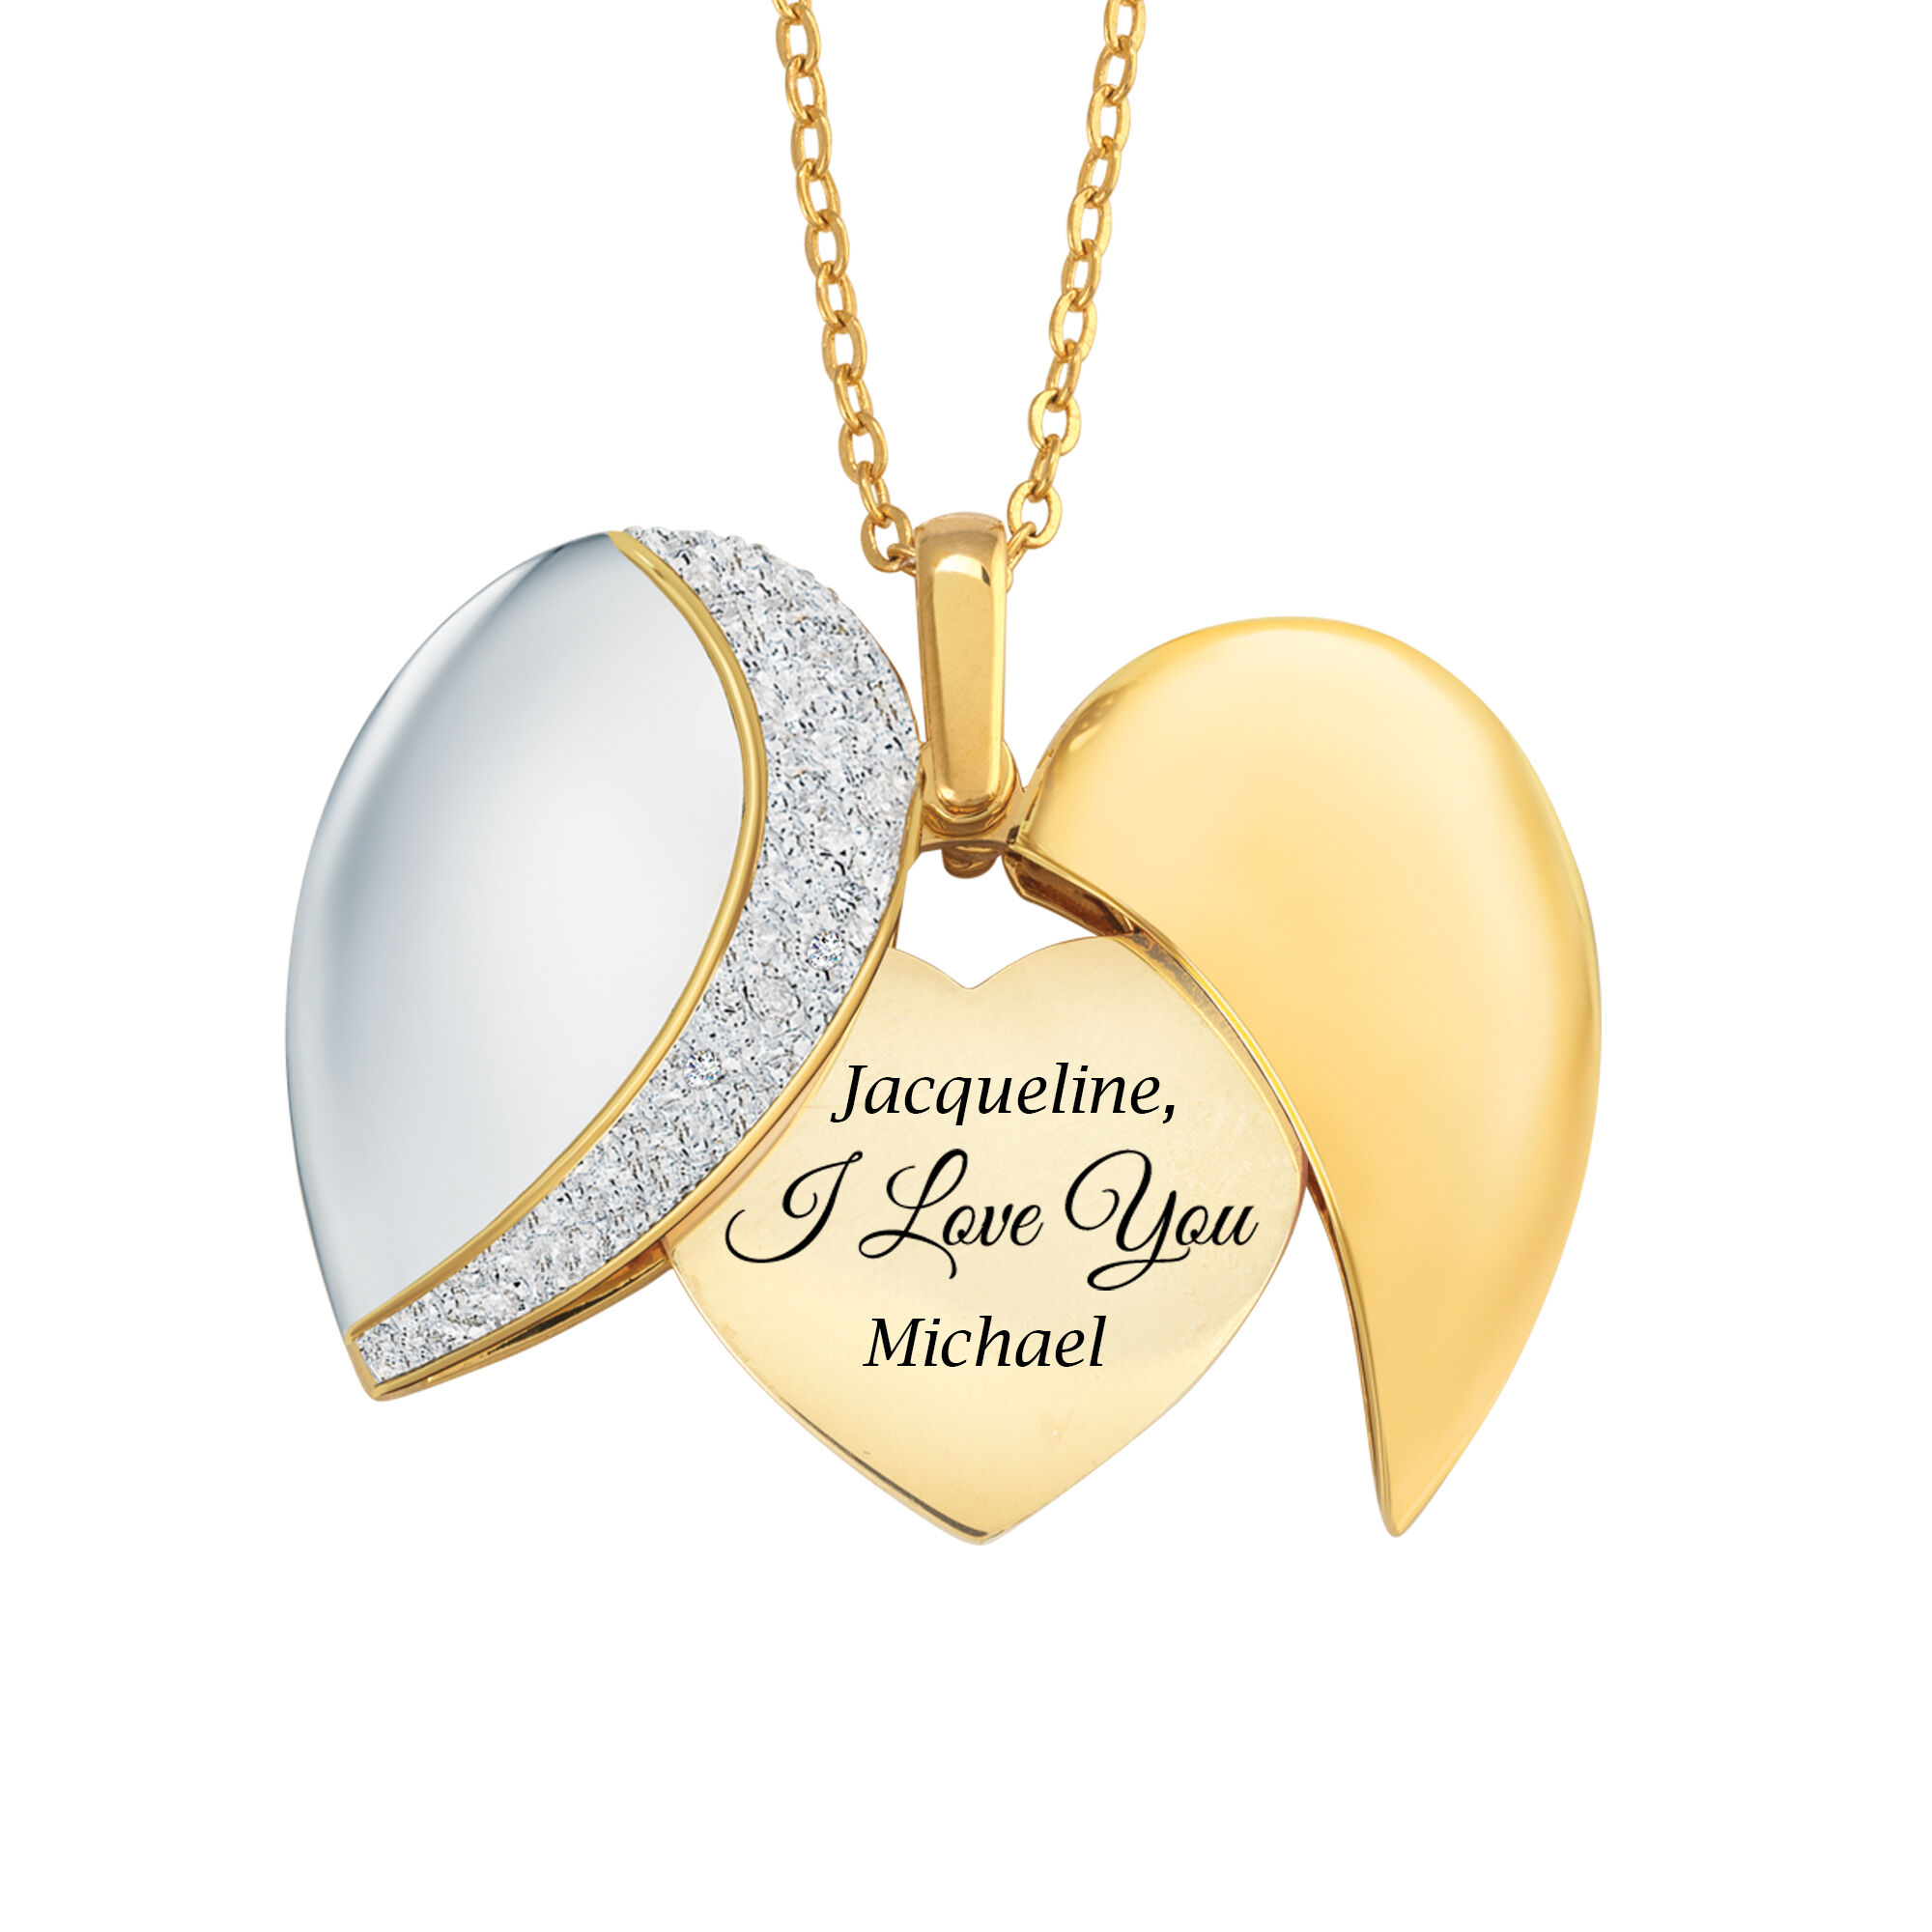 You and Me Forever Secret Message Diamond Pendant 10672 0014 b inset